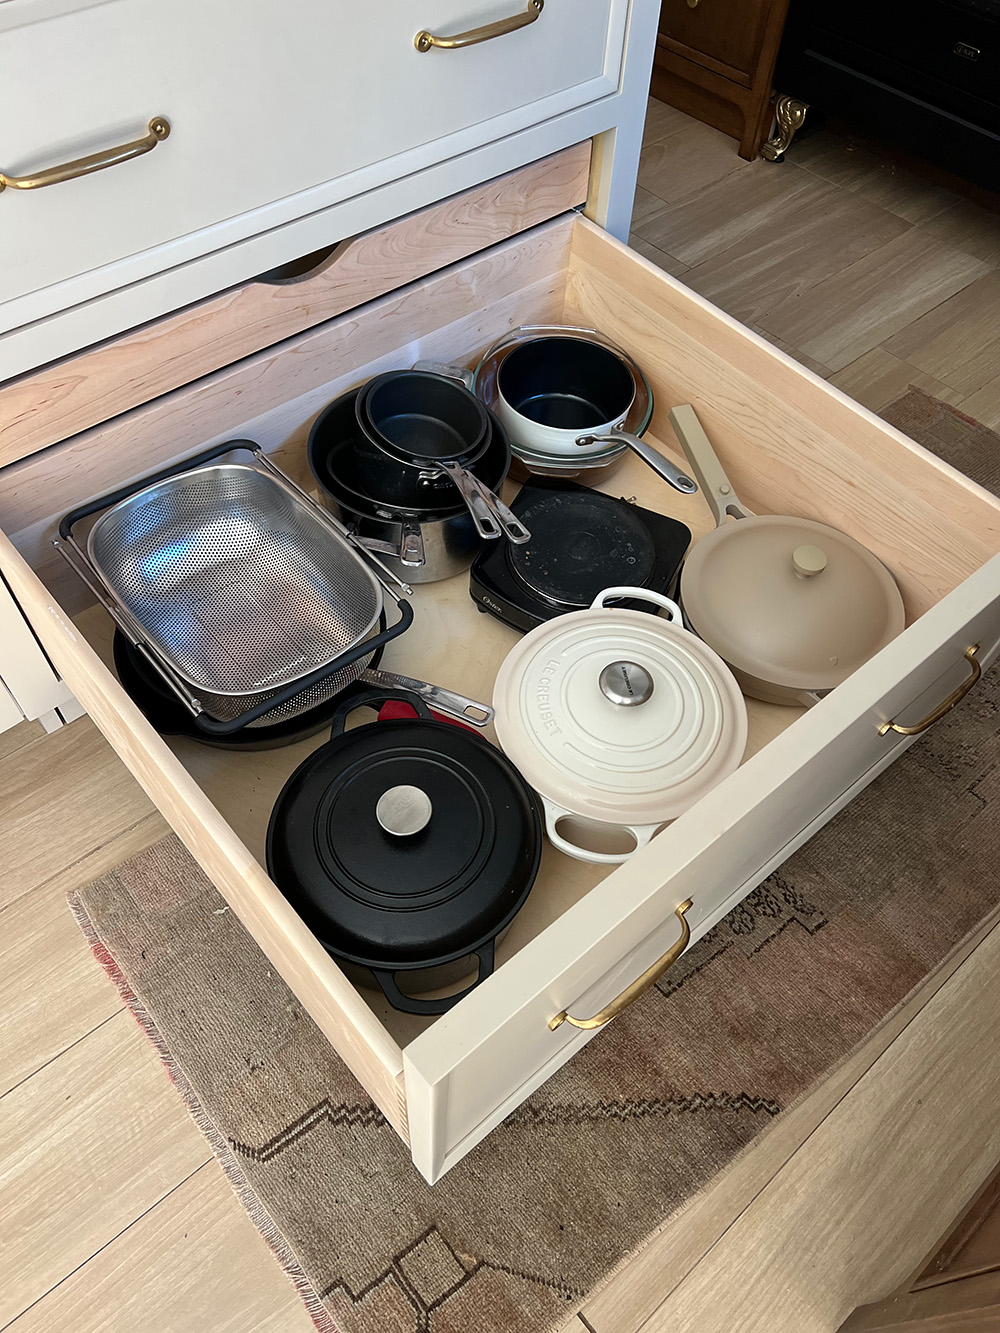 Drawer Storage for Pots and Pans